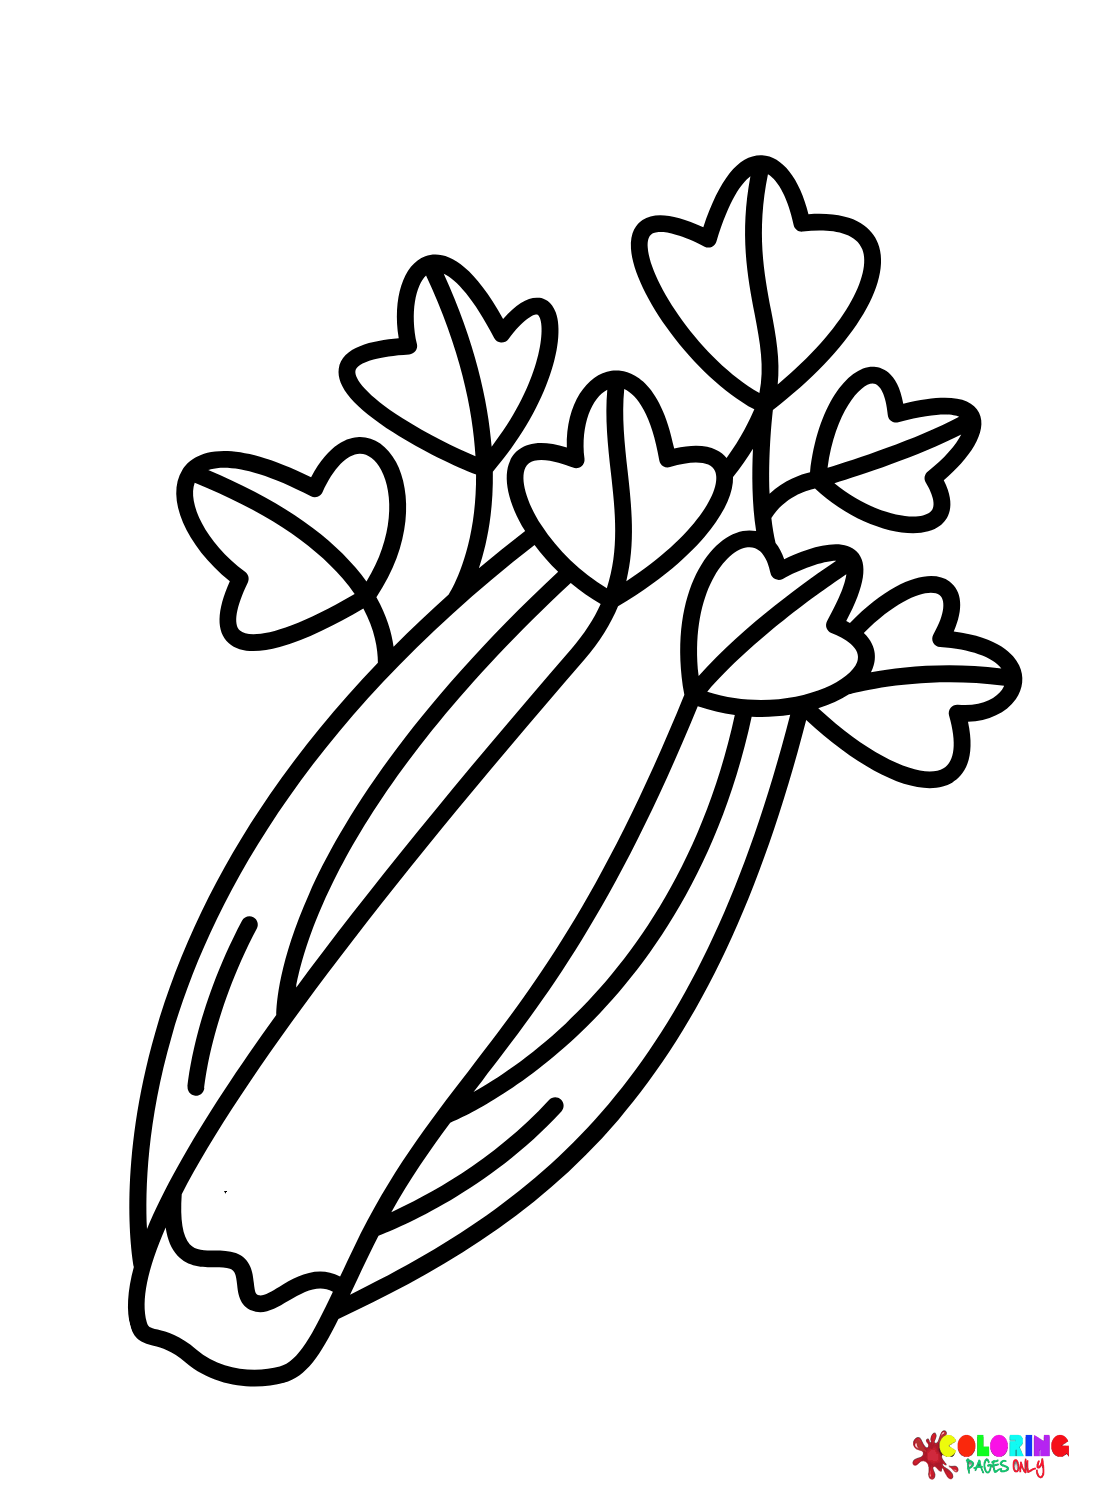 Celery Coloring Pages Printable for Free Download